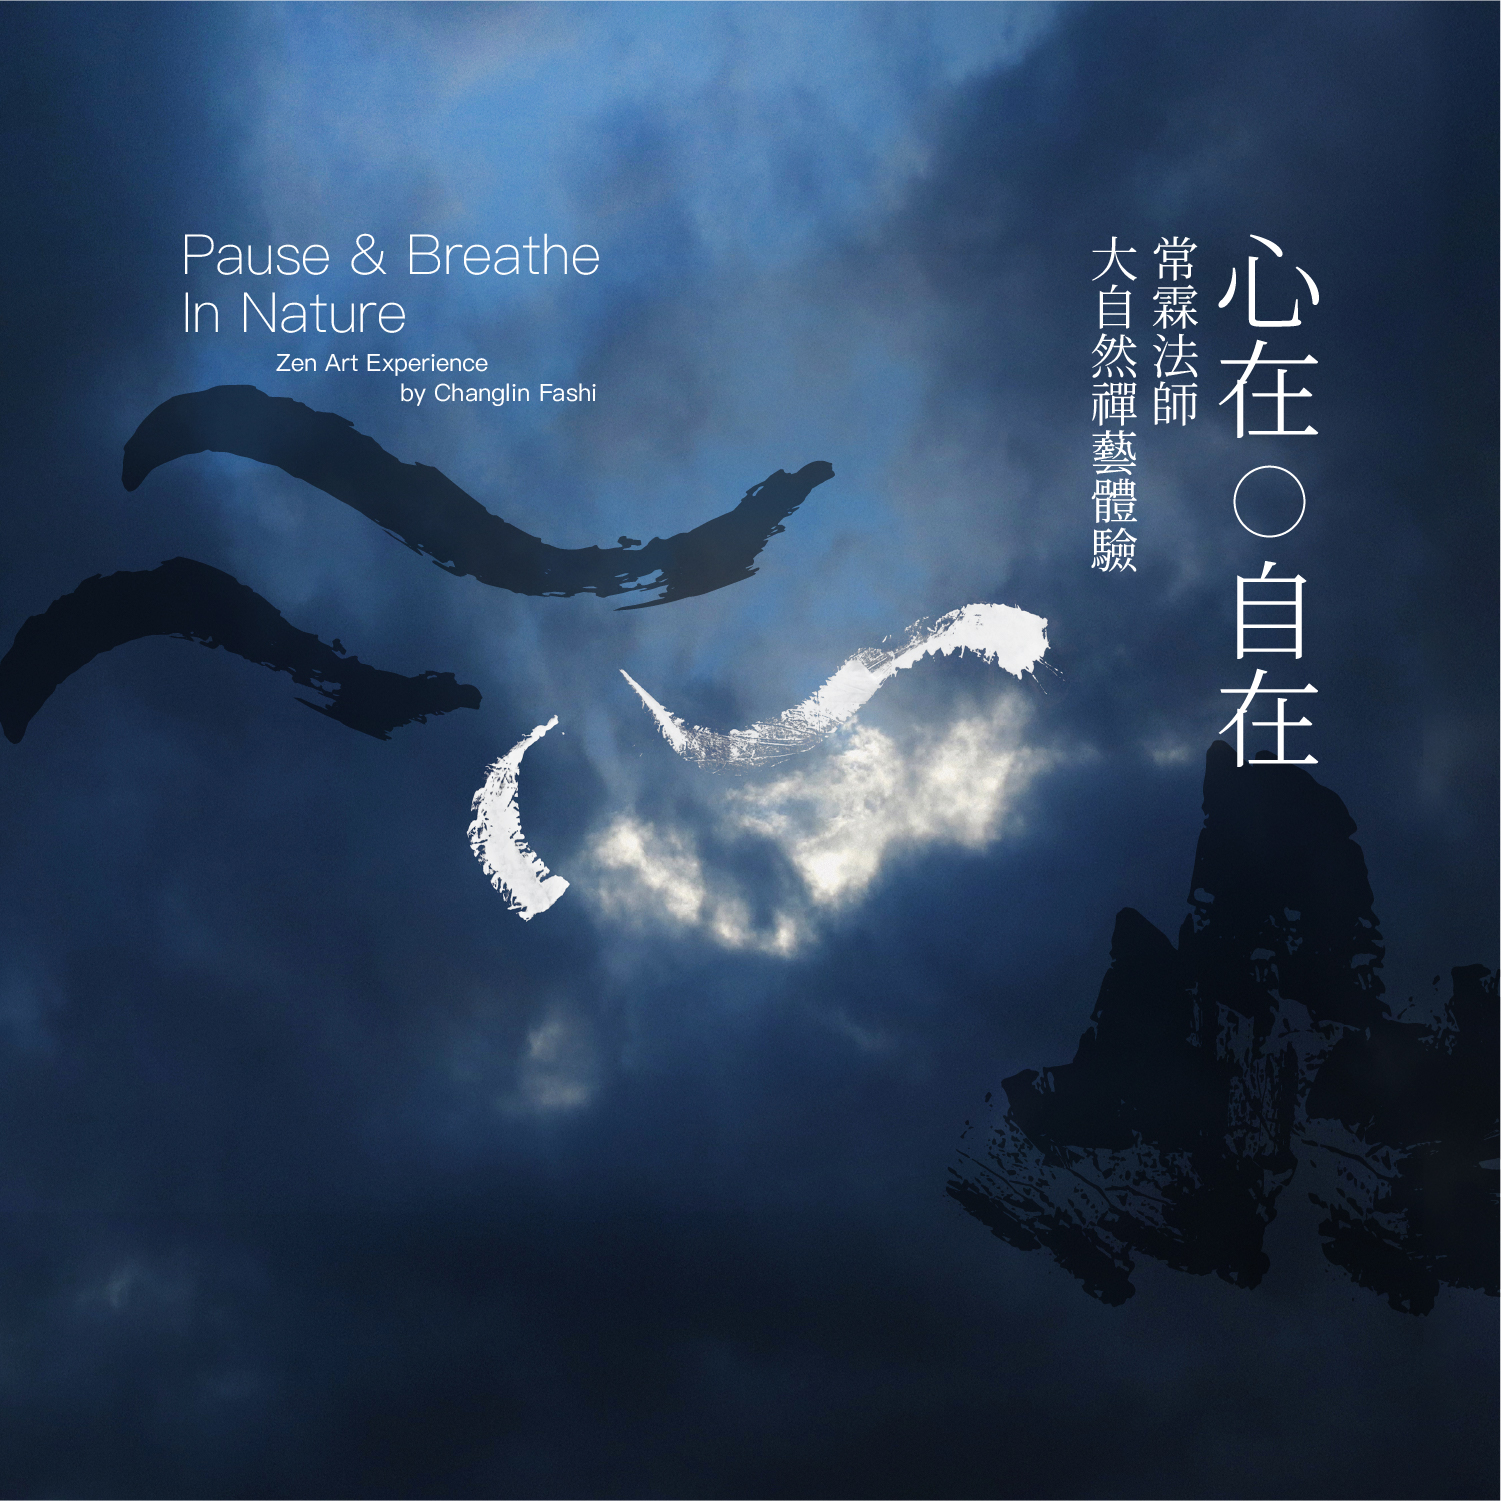 Pause & Breathe in Nature – Zen Art Experience by Changlin Fashi